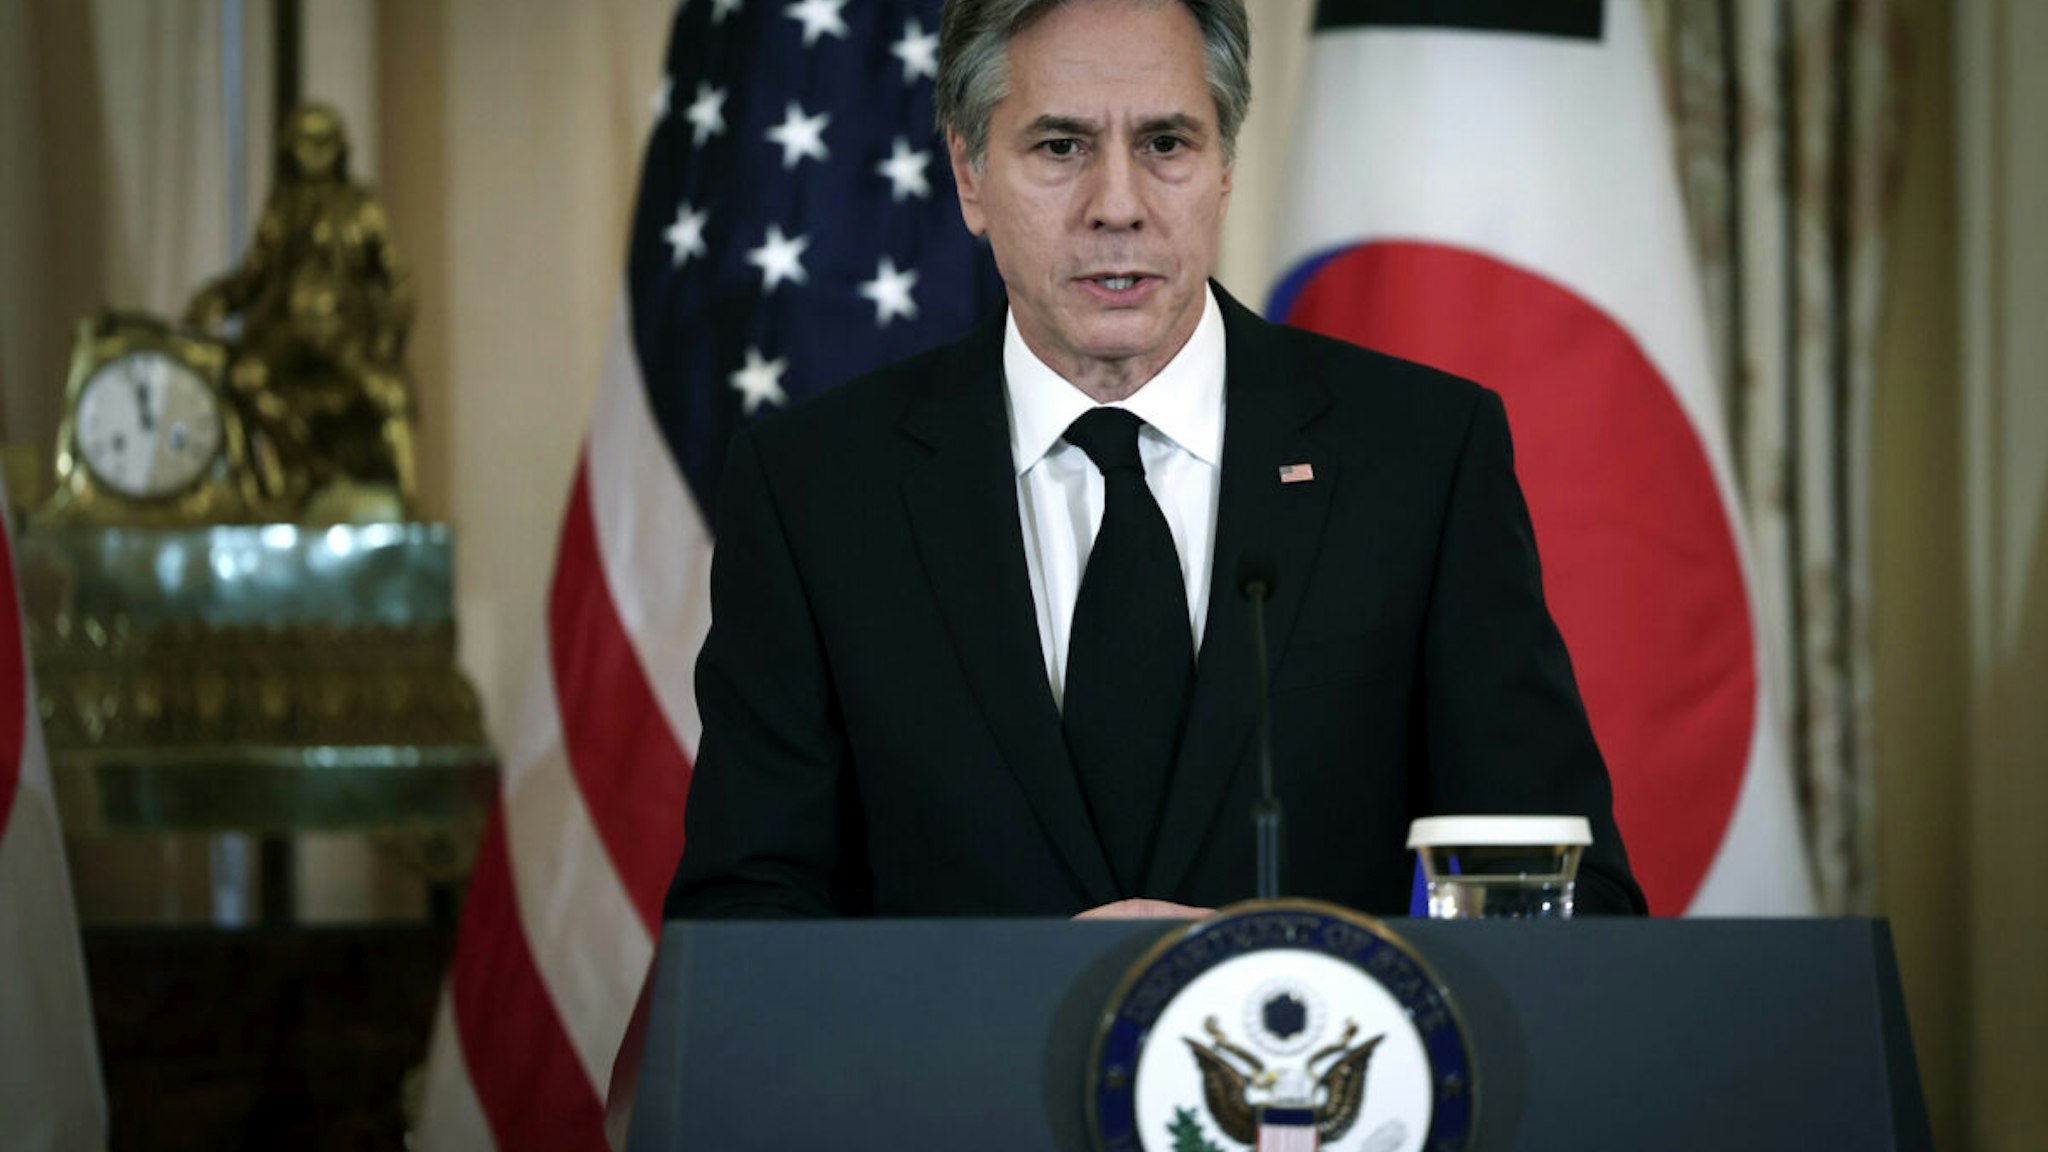 U.S. Secretary of State Antony Blinken speaks during an event with the South Korean foreign minister about the Chinese surveillance balloon identified in U.S. airspace February 3, 2023 in Washington, DC.